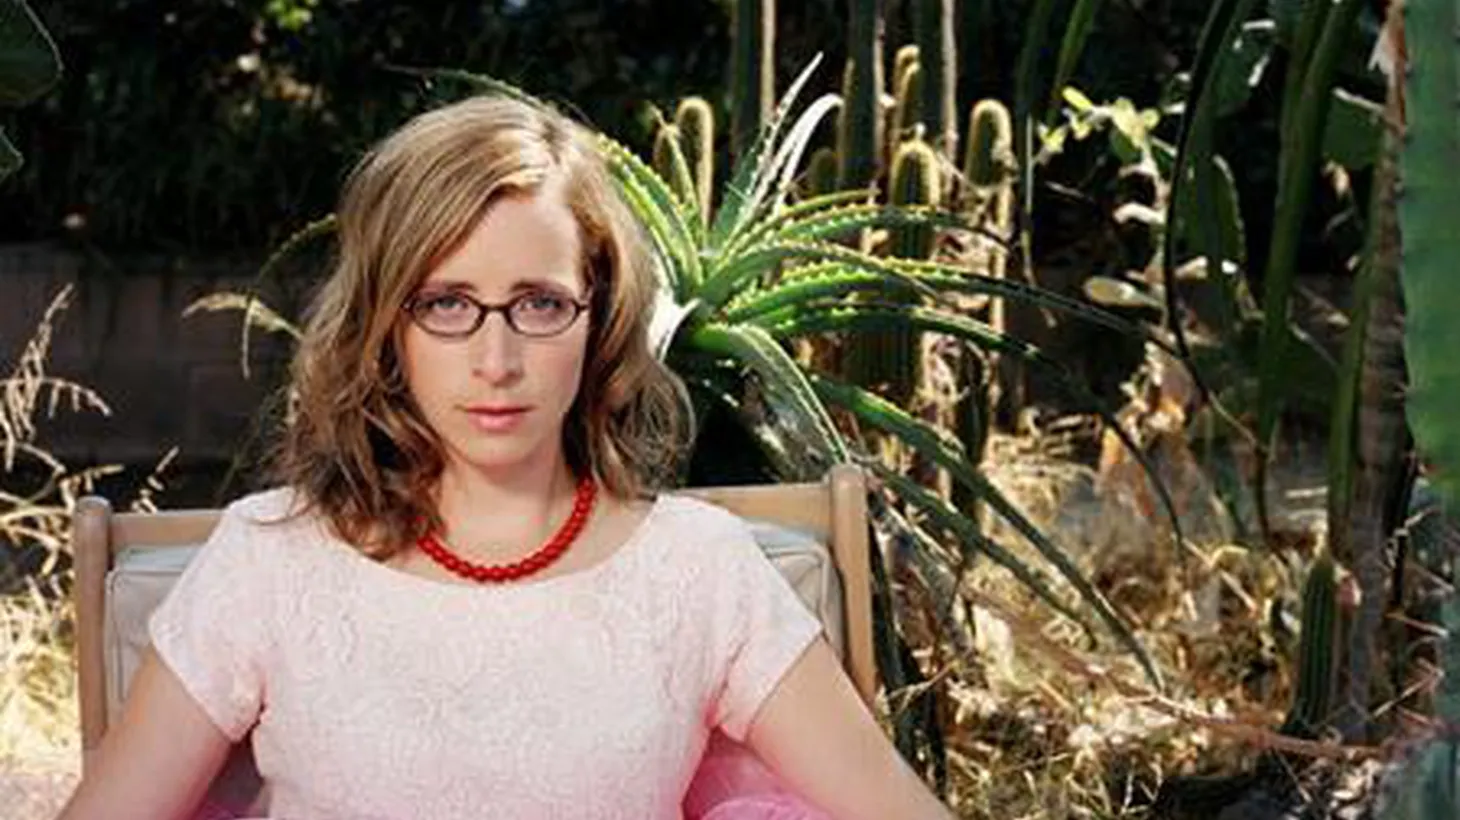 Portland-based Laura Veirs will warm the studios with songs from her gorgeous new release "July Flame." We'll catch up with this talented singer/songwriter on Morning Becomes Eclectic at 11:15am.